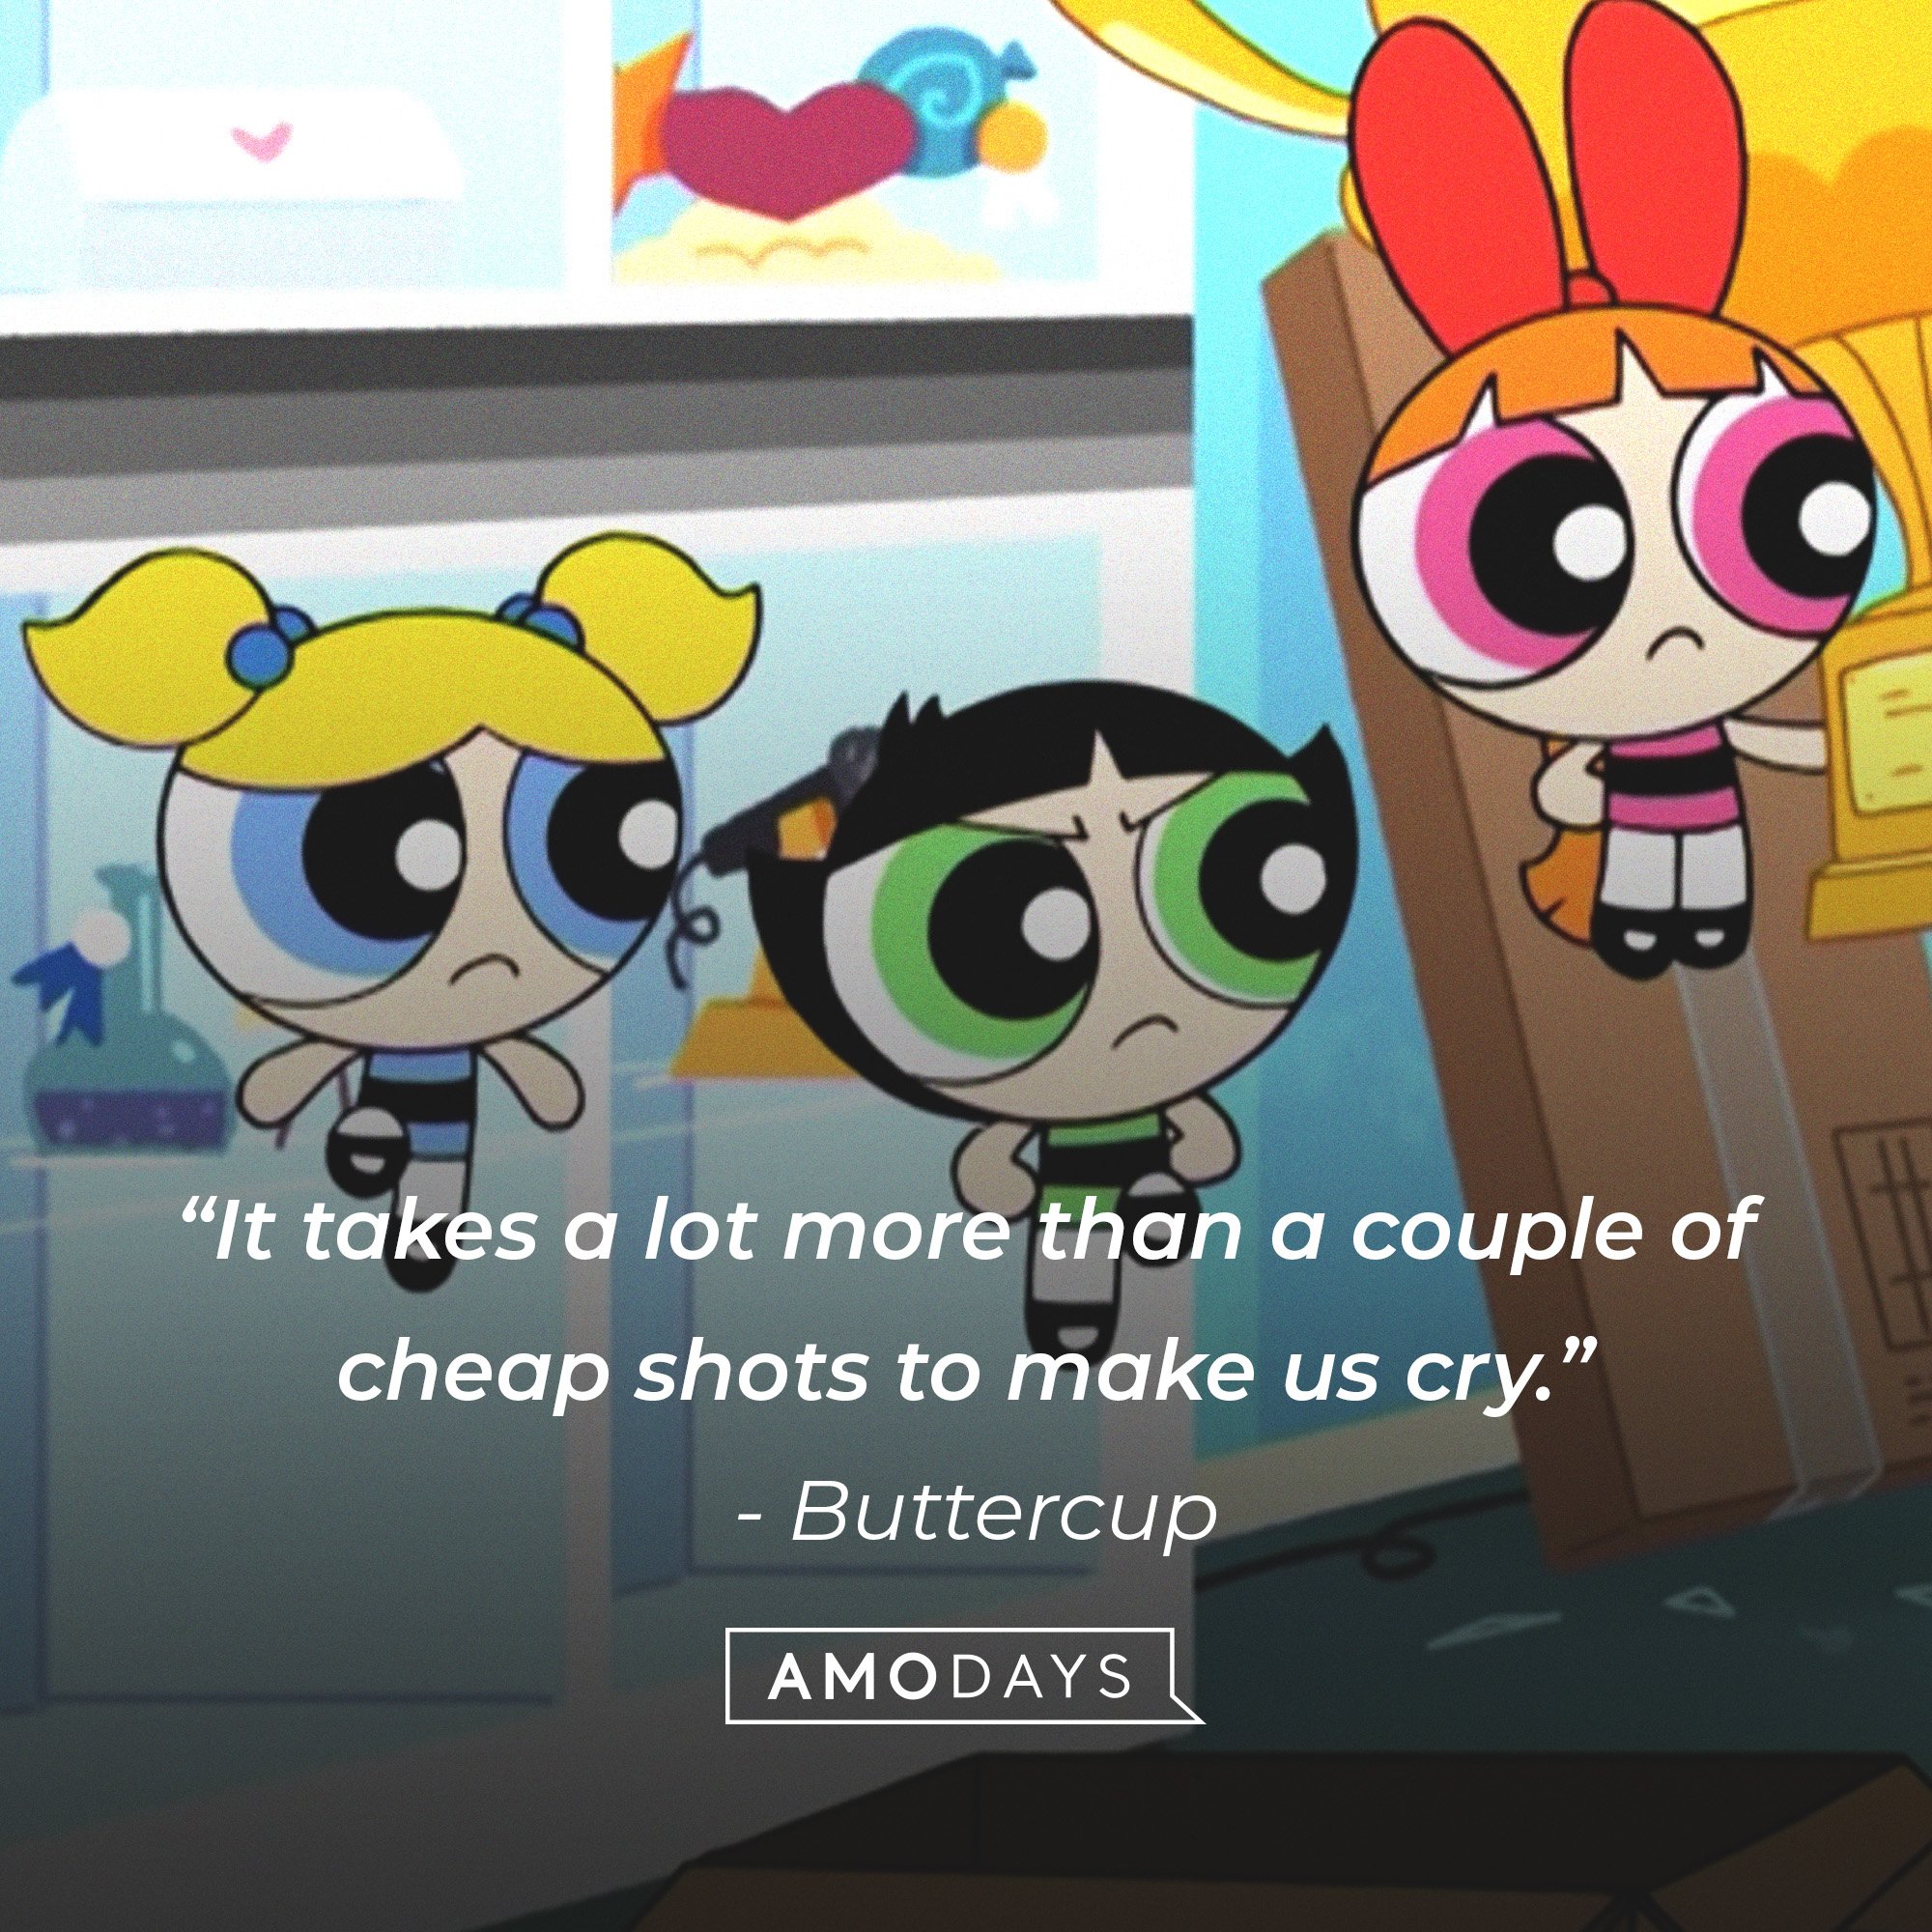  Buttercup’s quote: “It takes a lot more than a couple of cheap shots to make us cry.”  | Image: AmoDays